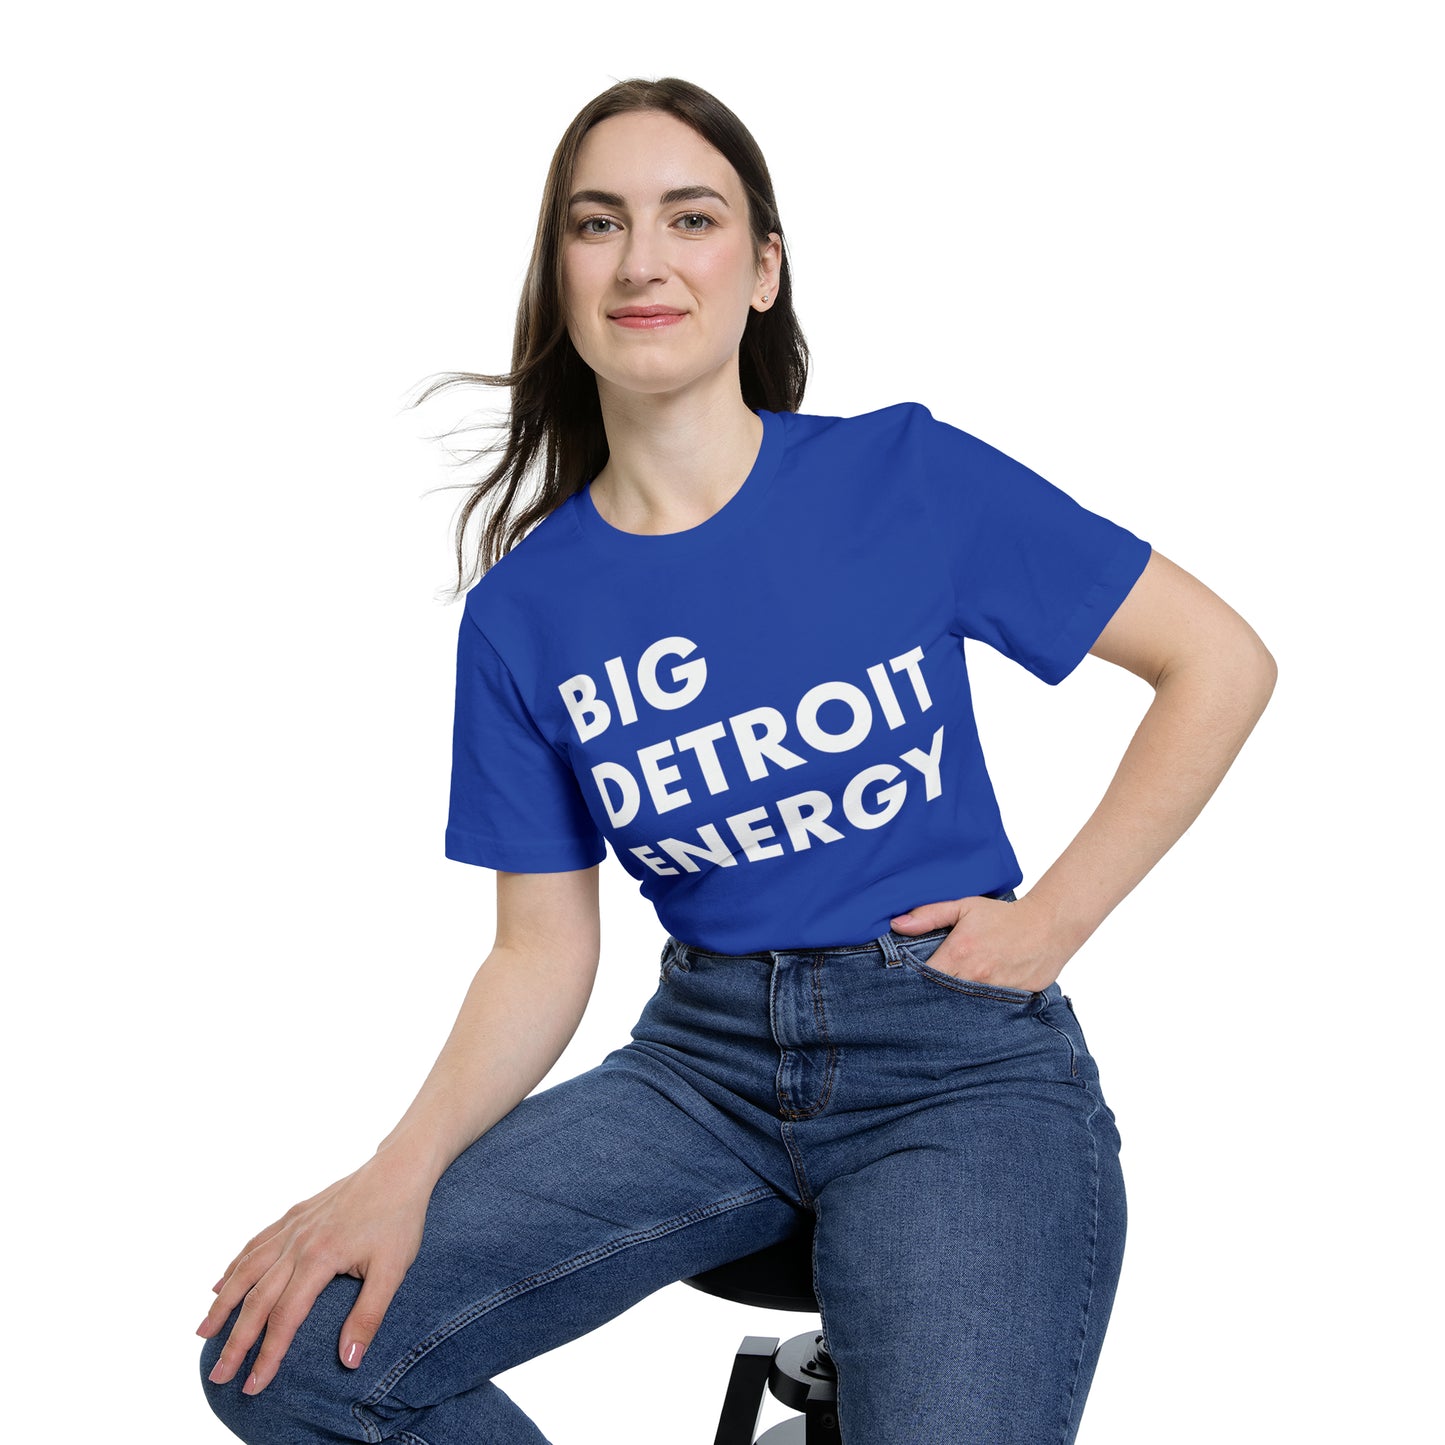 'Big Detroit Energy' T-Shirt | Made in USA